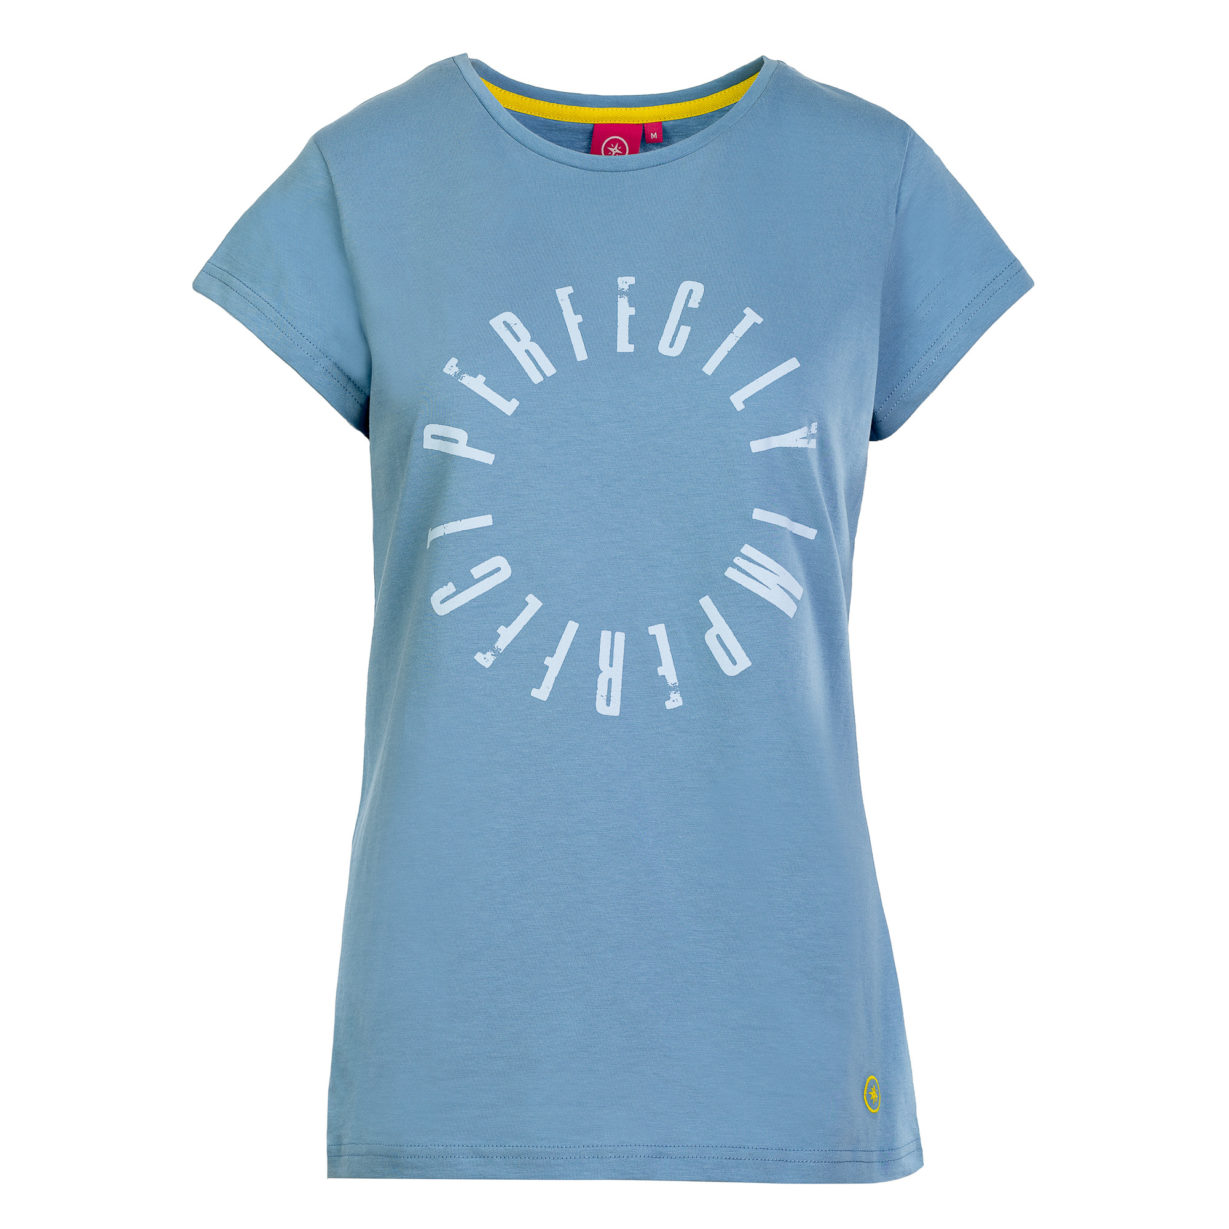 Feeling - T-Shirt mit Print Perfectly Imperfect